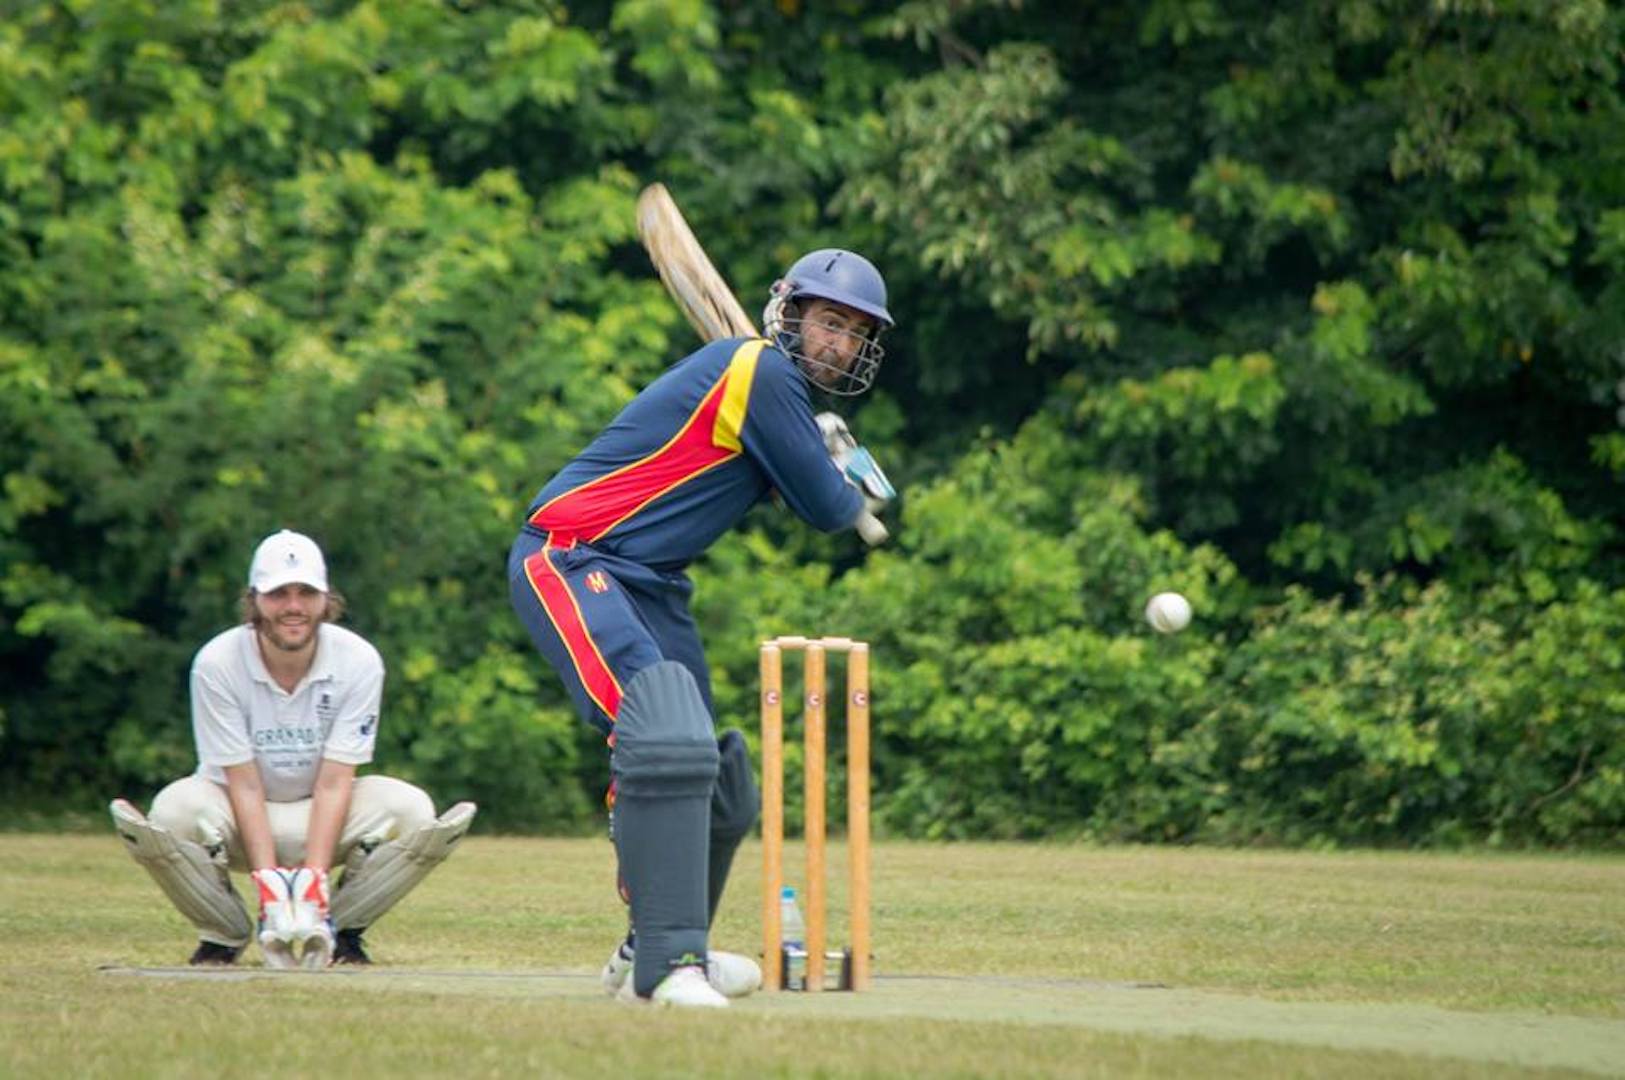 Brazil,Six teams will be competing in the 2019 Cricket National Championships this weekend in Rio.